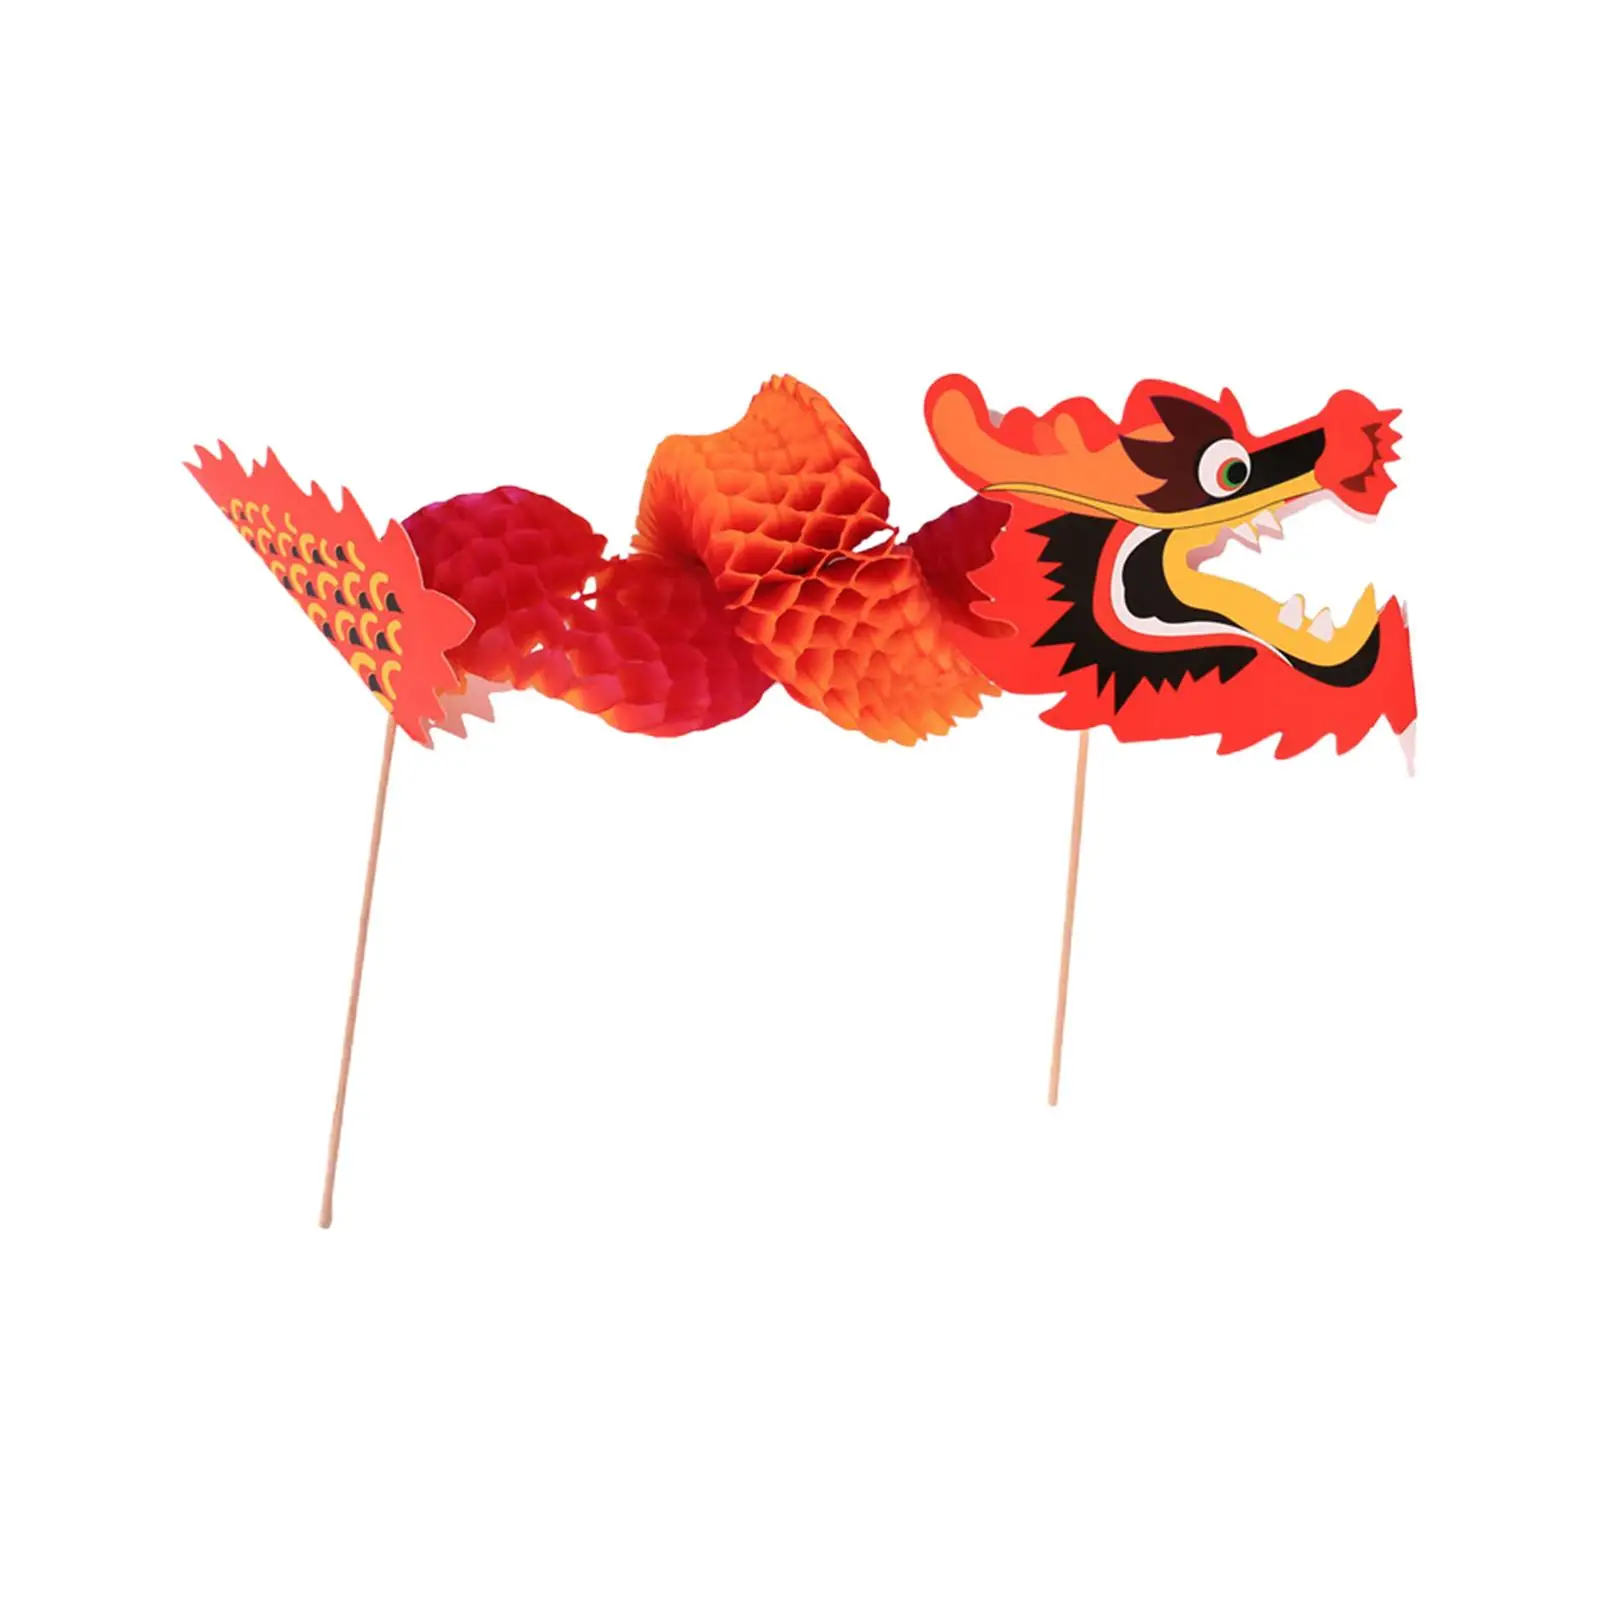 3D Chinese New Year Paper Dragon Crafts for Spring Festival Party Toddlers Decoration